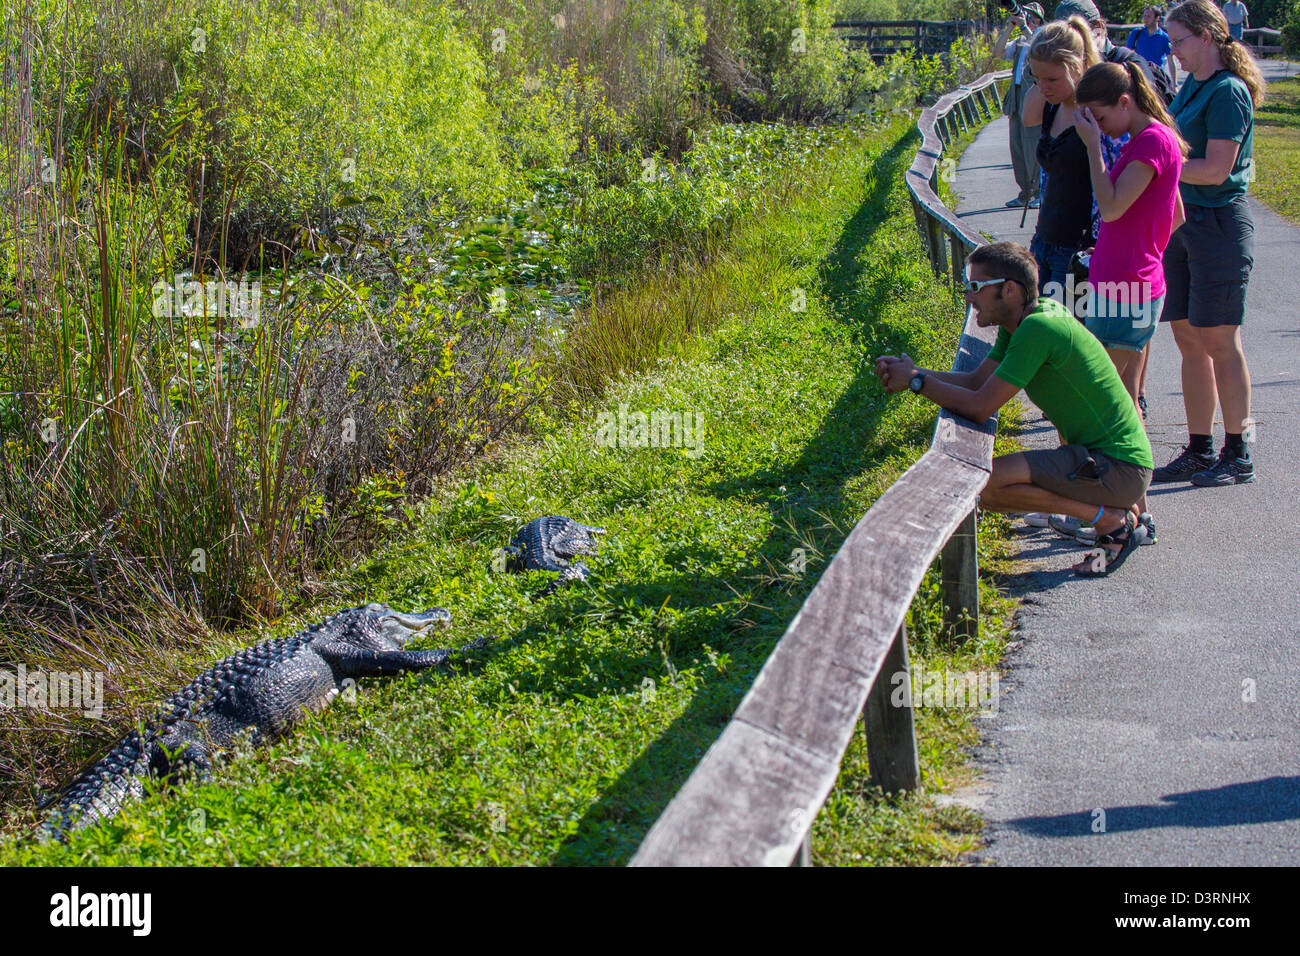 People watching Alligators on the Anhinga Trail at the Royal Palm Visitor Center in Everglades National Park Florida Stock Photo